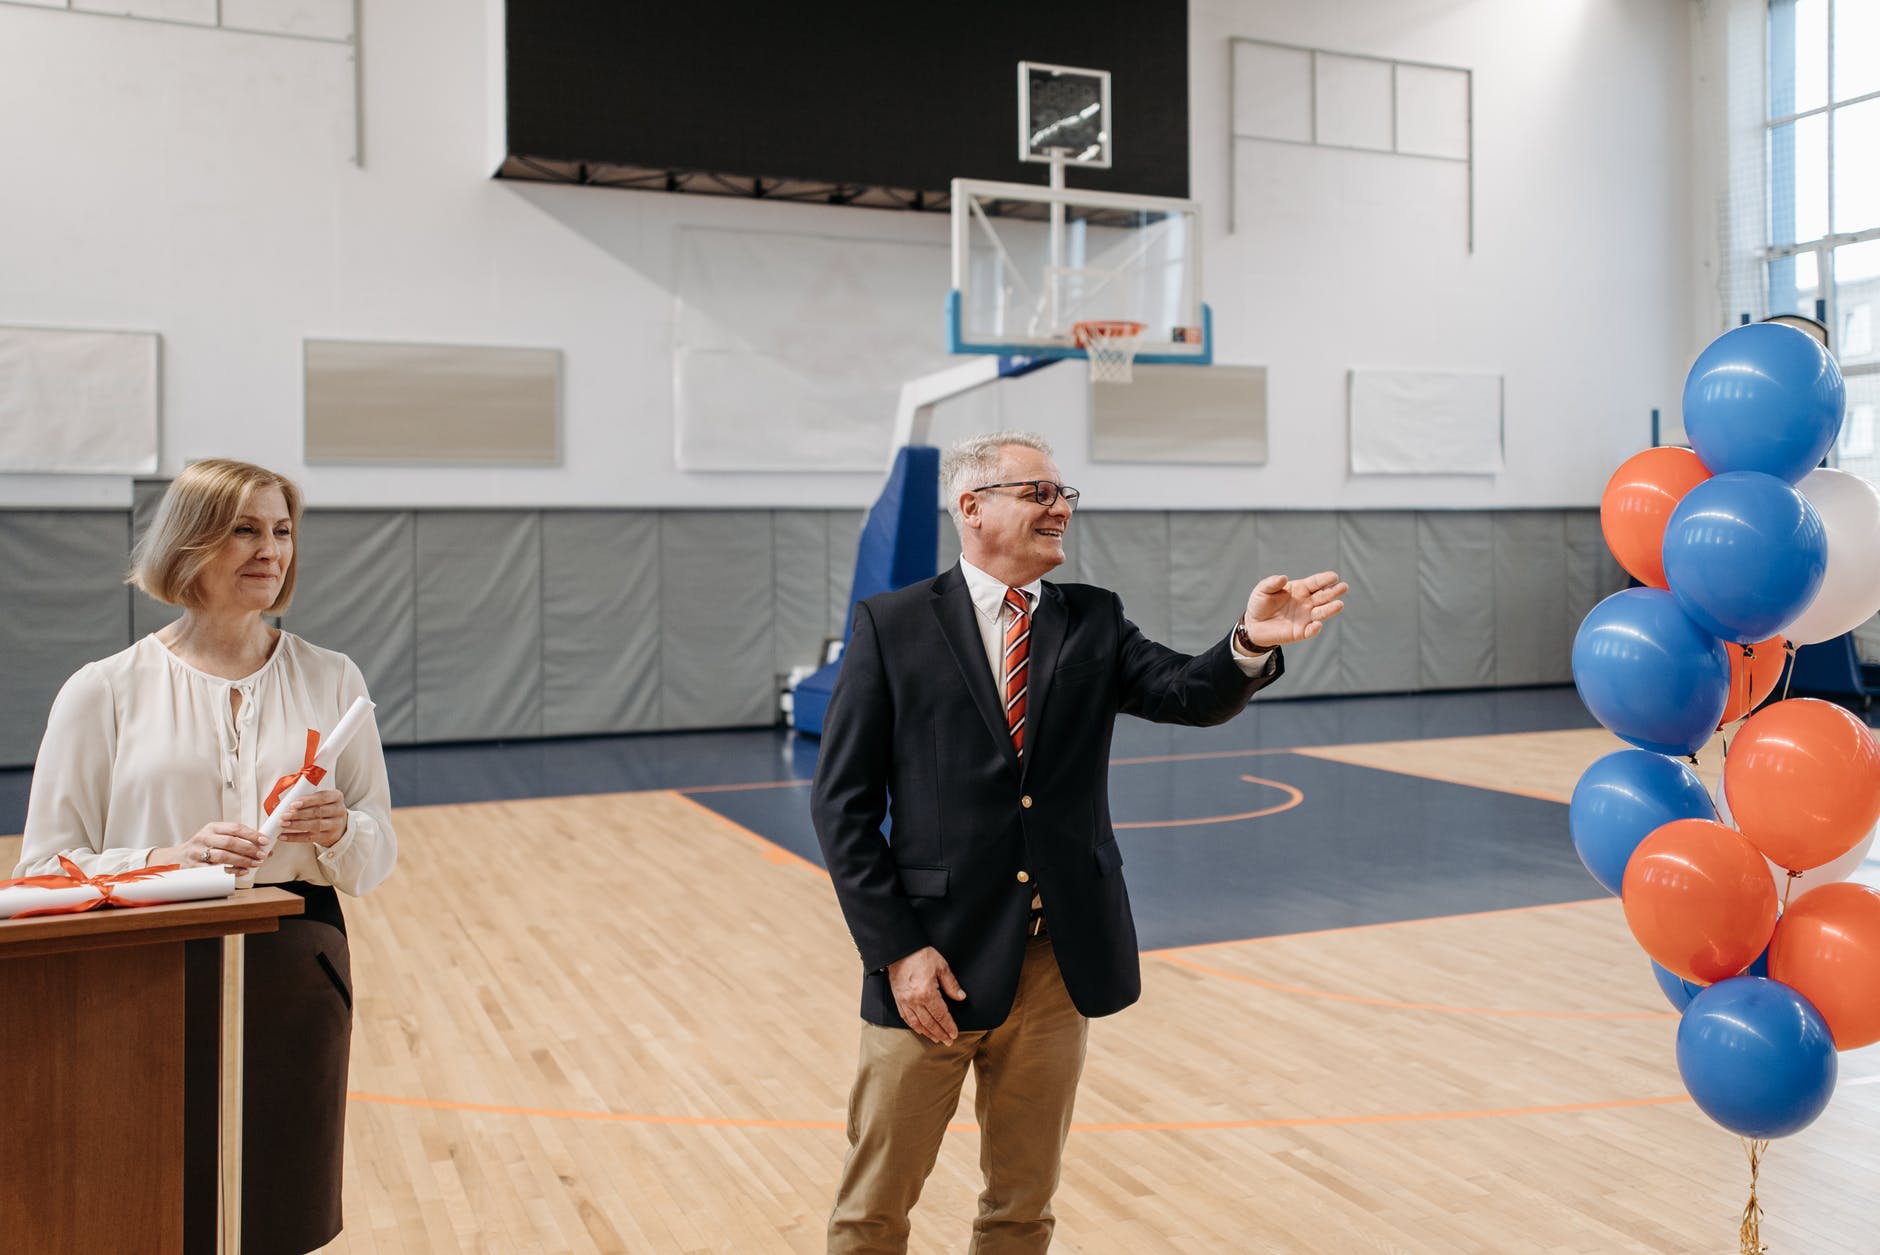 There was a school assembly at the gym. | Source: Pexels